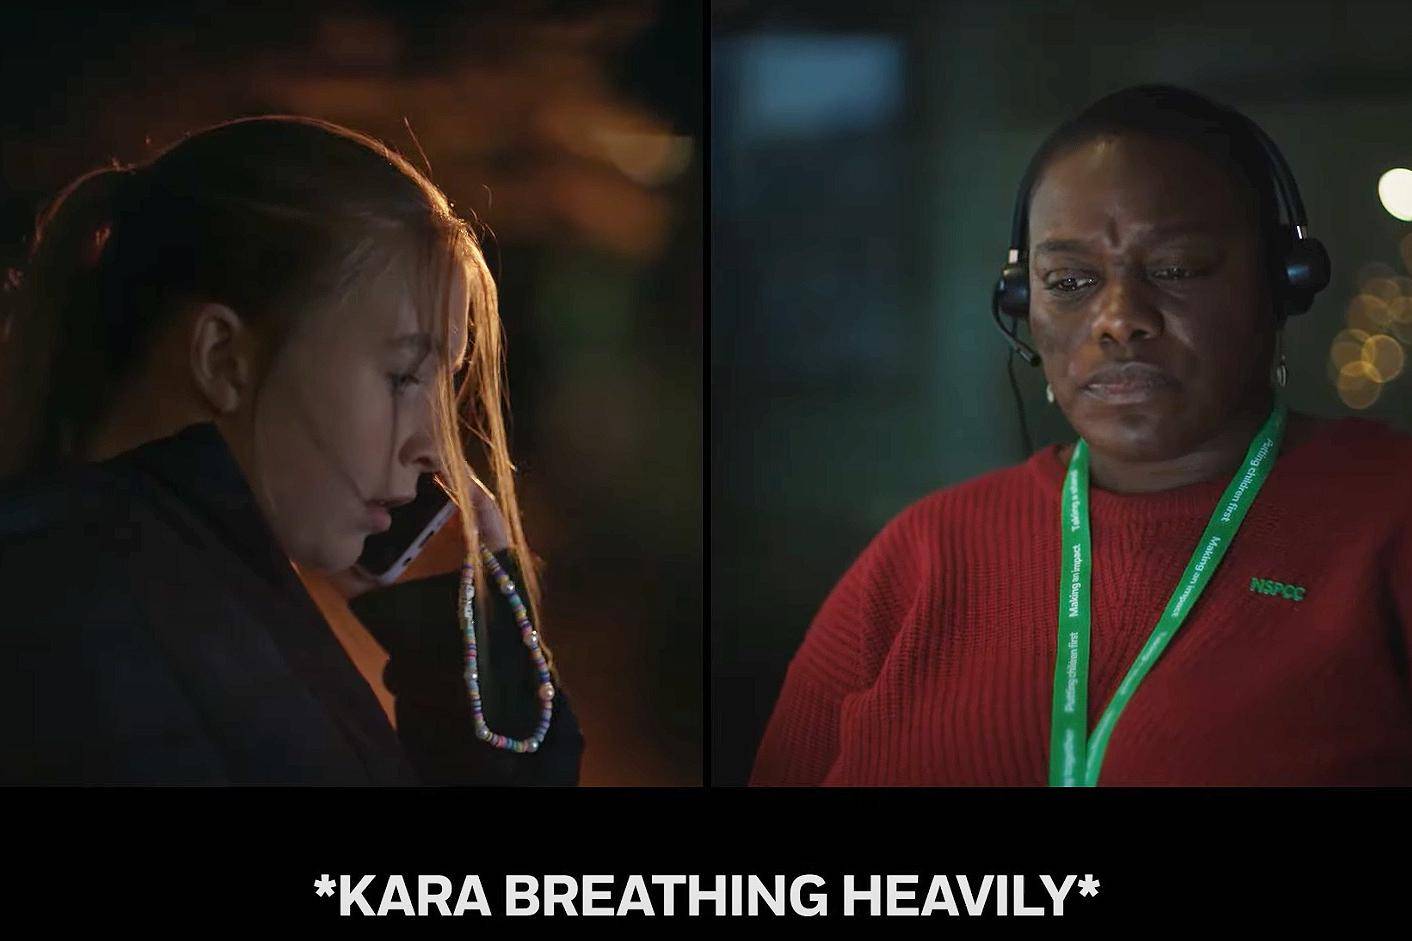 A scene from Childline's Christmas television advert, which has been based on real calls to the service's counsellors.